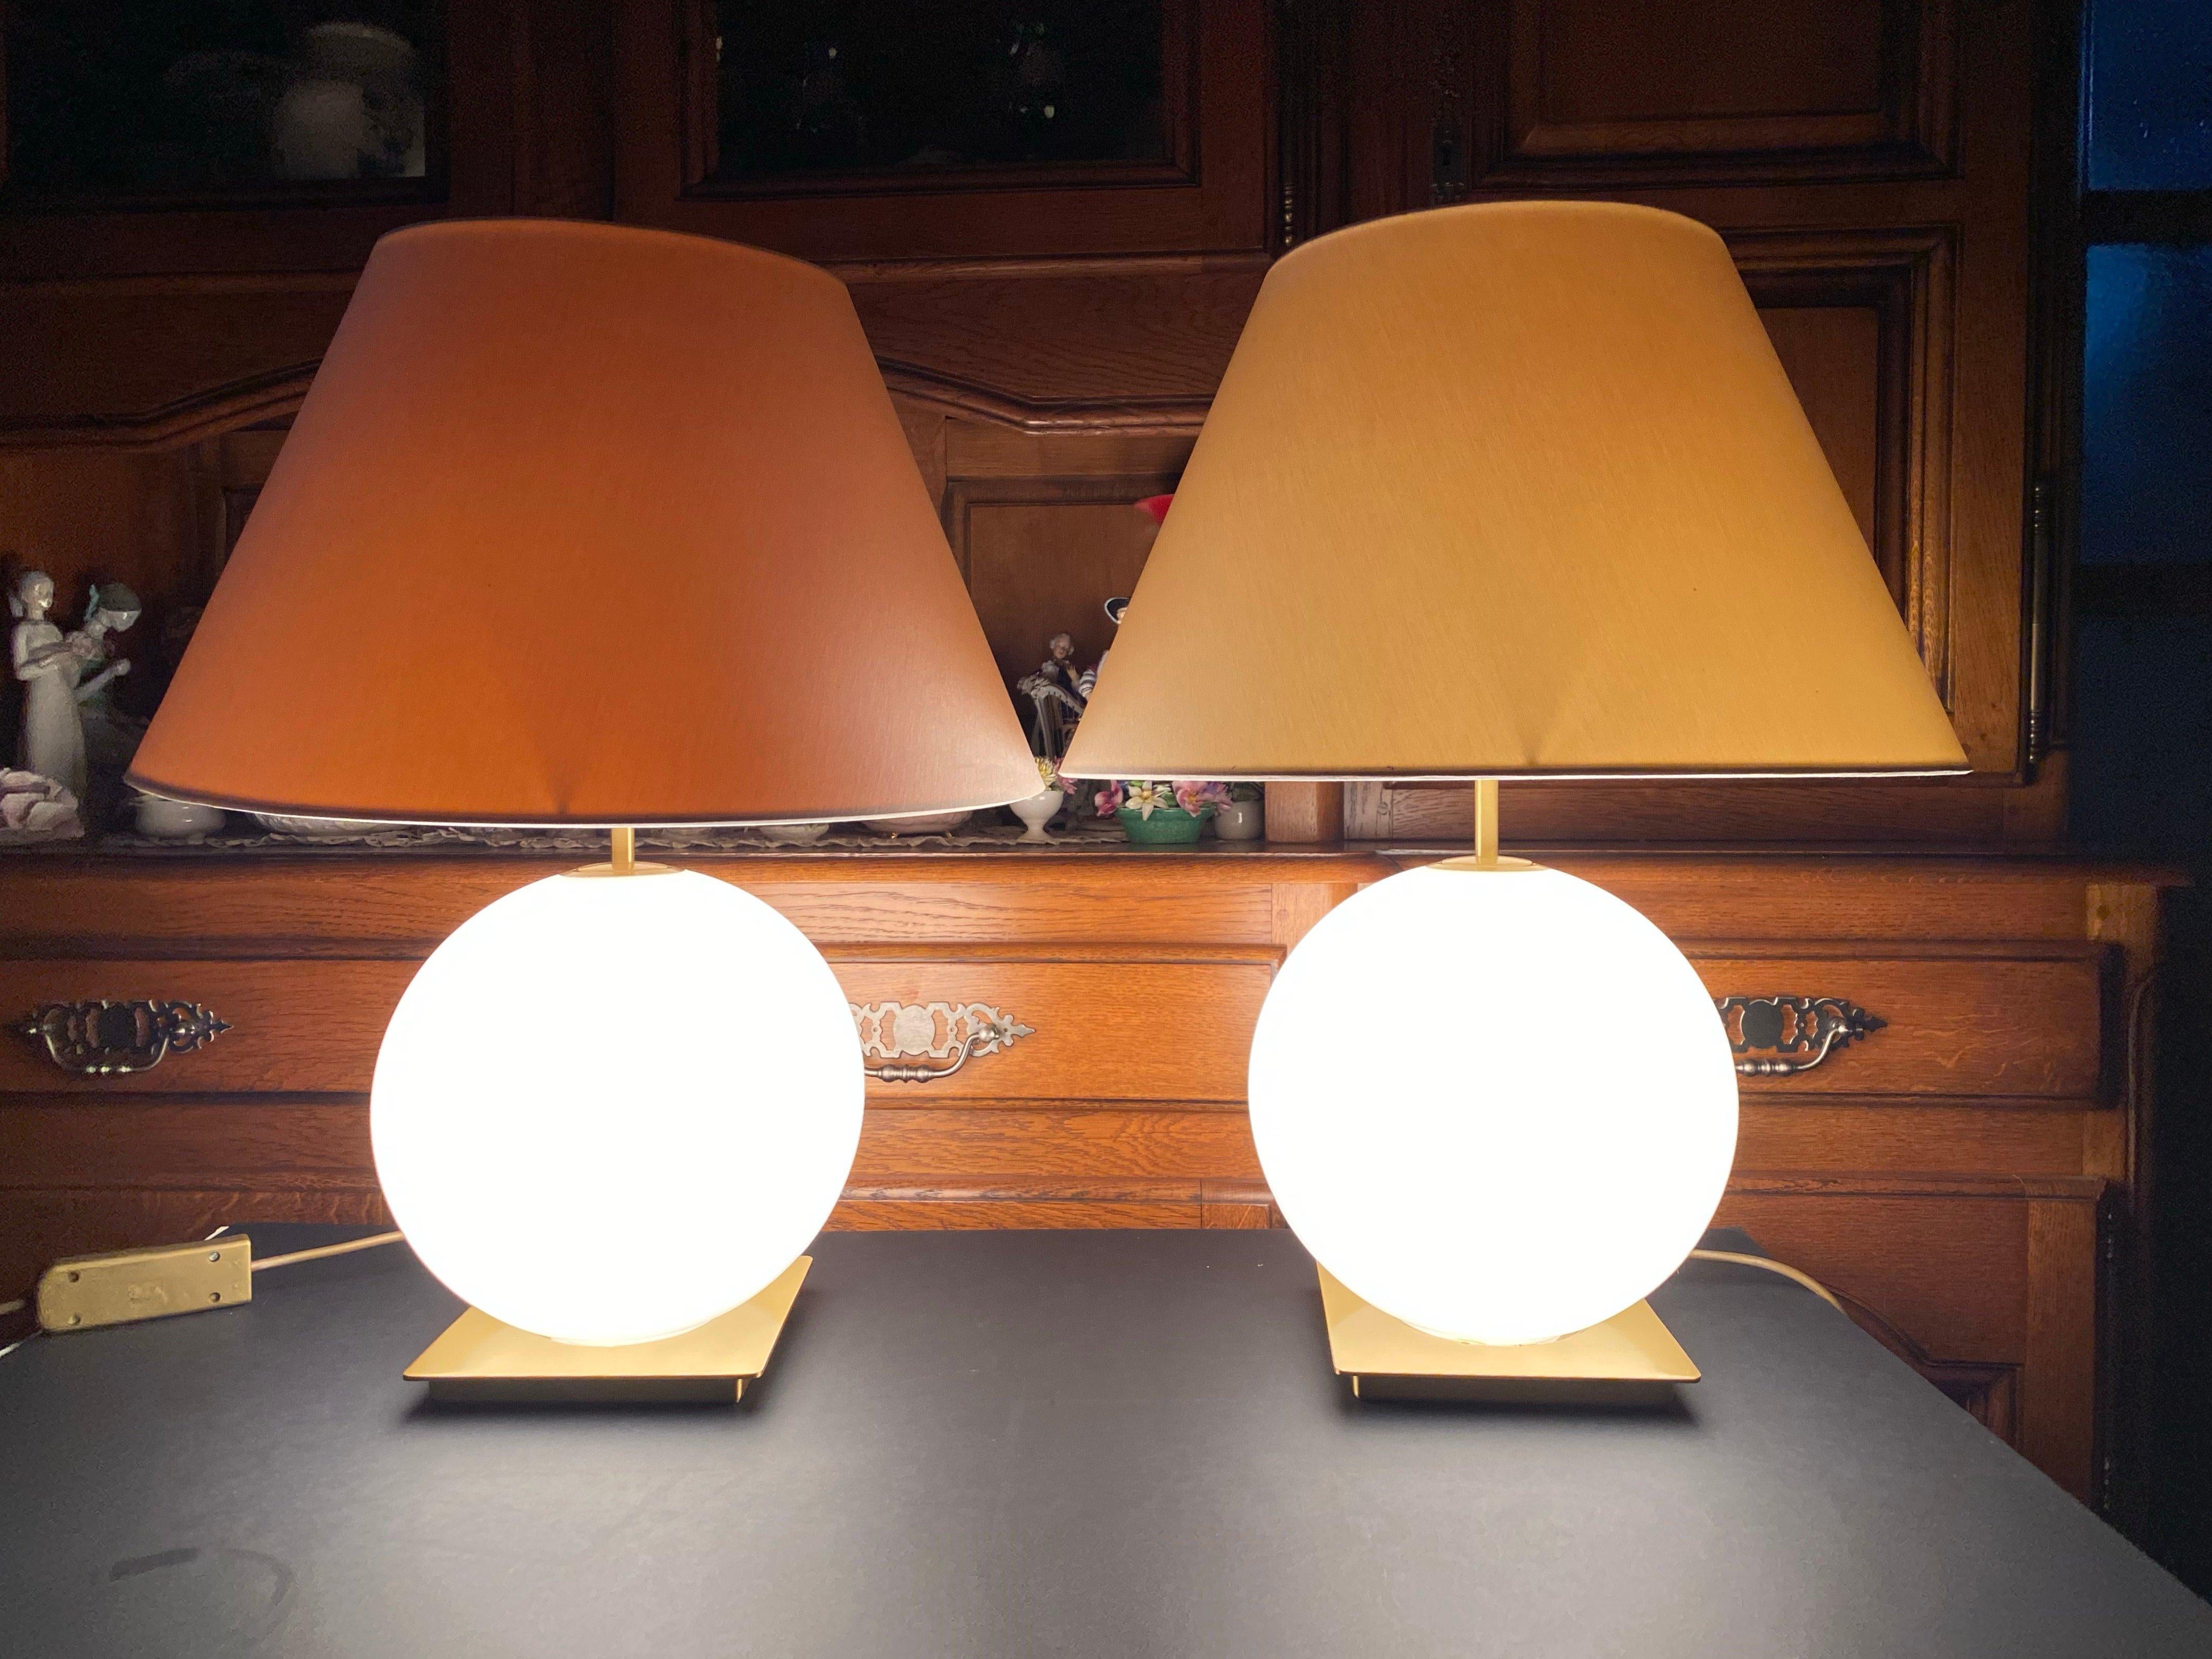 A pair of very elegant table lamps from famous German manufacturer Holtkötter. 

Holtkötter has been engineering and manufacturing product in Germany for over 50 years and assembling product in the U.S. for about 30 years. 

The spherical body is